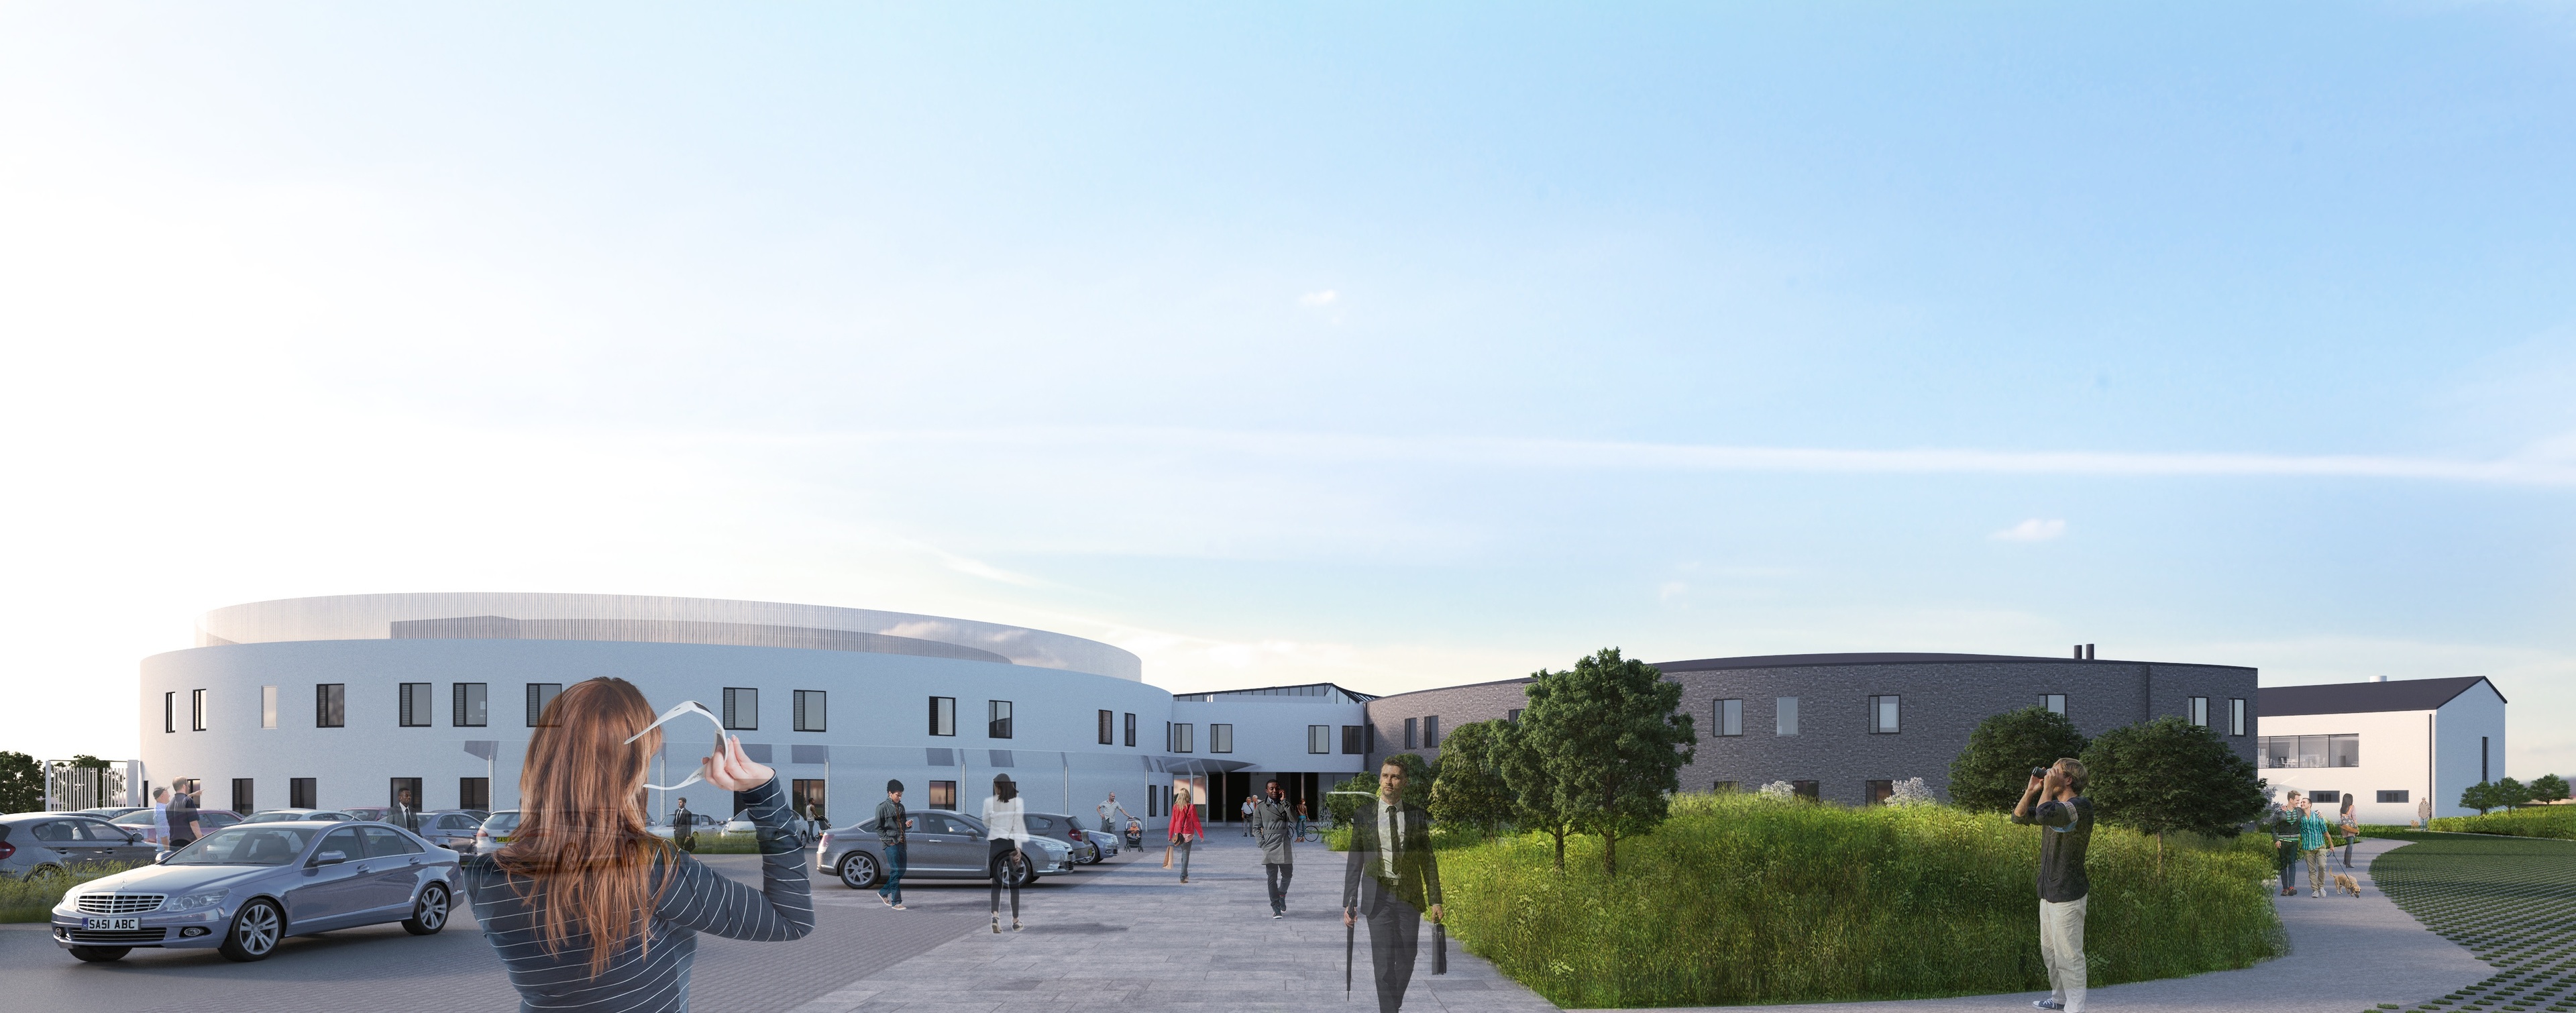 An artist's impression of Orkney's new hospital and healthcare facility.